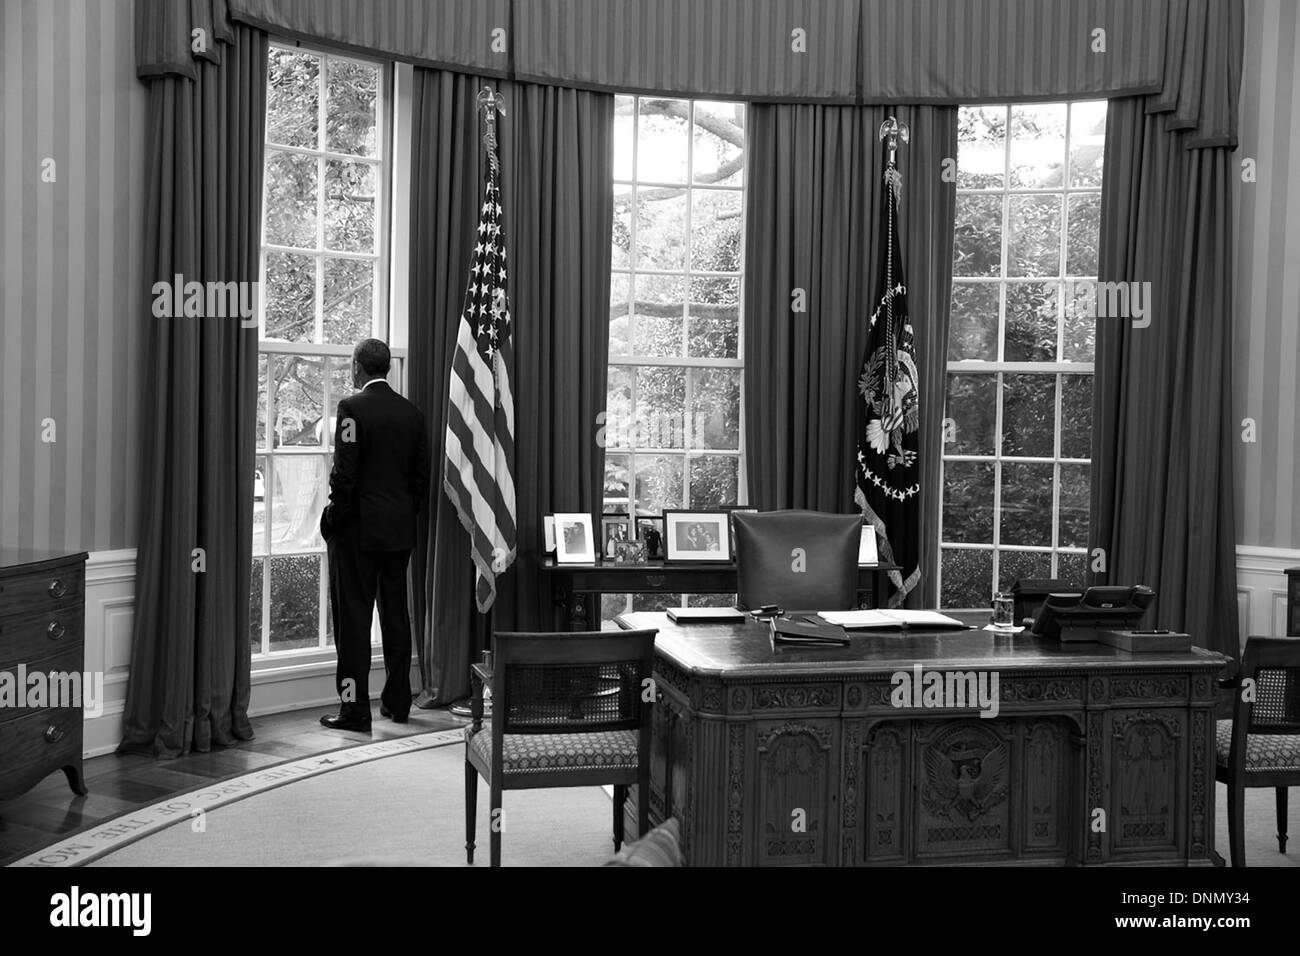 Us President Barack Obama Looks Out The Window Of The Oval Office Stock